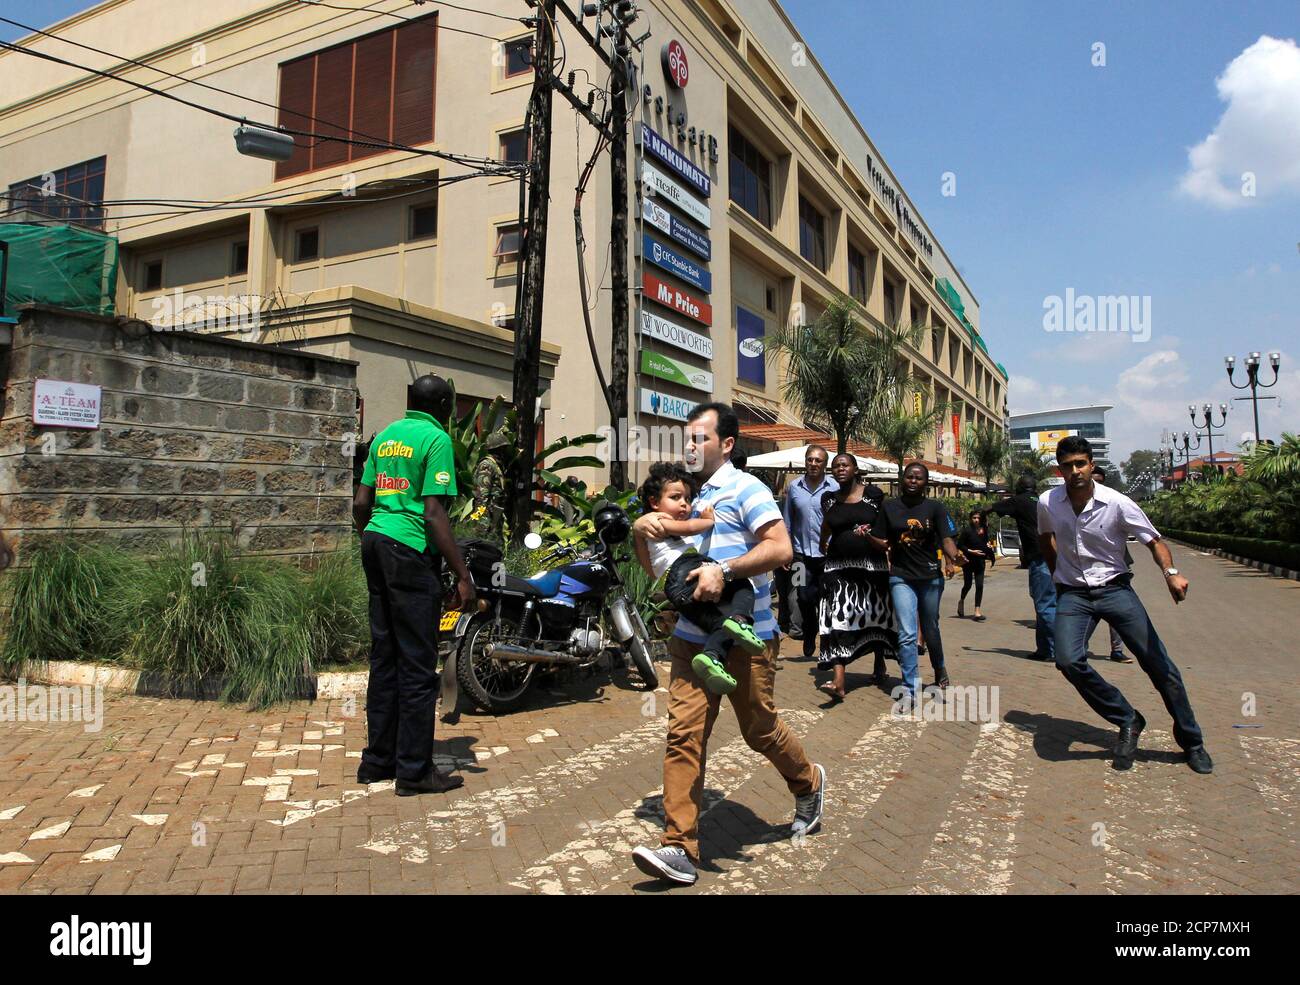 Customers run following a shootout between unidentified armed men and the police at the Westgate shopping mall in Nairobi September 21, 2013. At least nine people were killed in a shooting in the shopping mall in the Kenyan capital, Nairobi, on Saturday, witnesses said. REUTERS/Thomas Mukoya (KENYA - Tags: CIVIL UNREST) Stock Photo